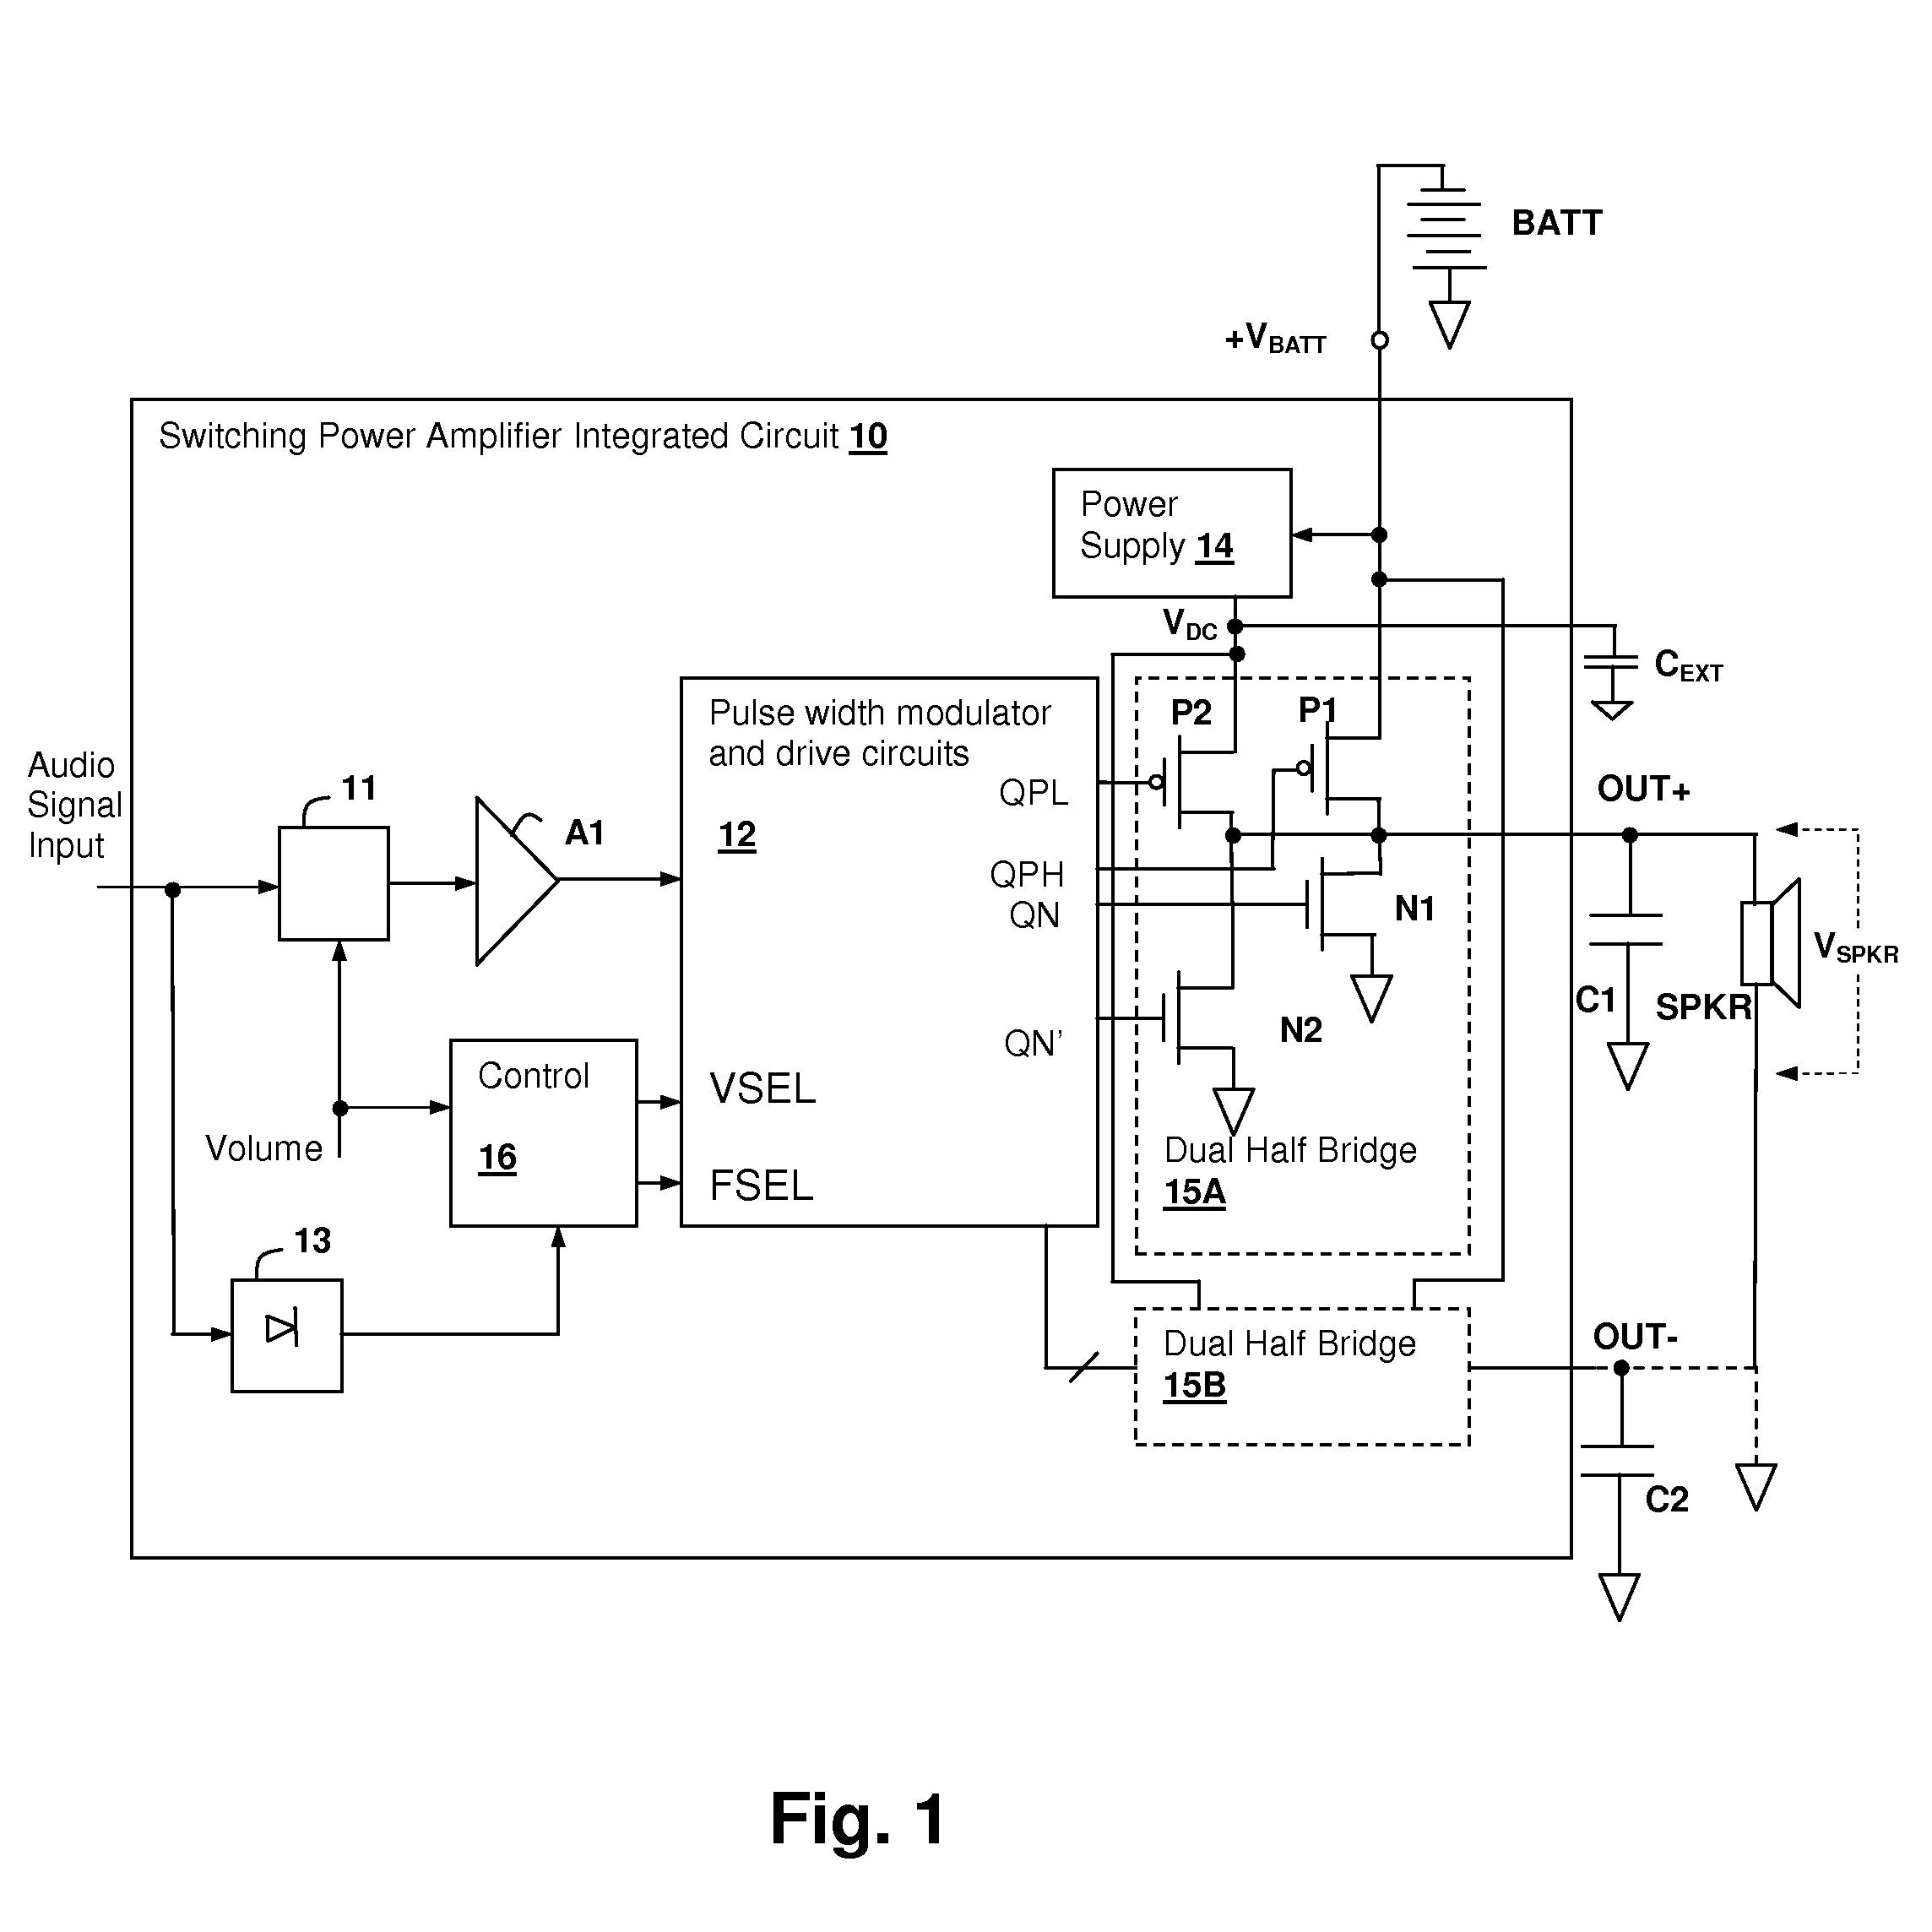 Pulse-width modulated (PWM) audio power amplifier having output signal magnitude controlled pulse voltage and switching frequency